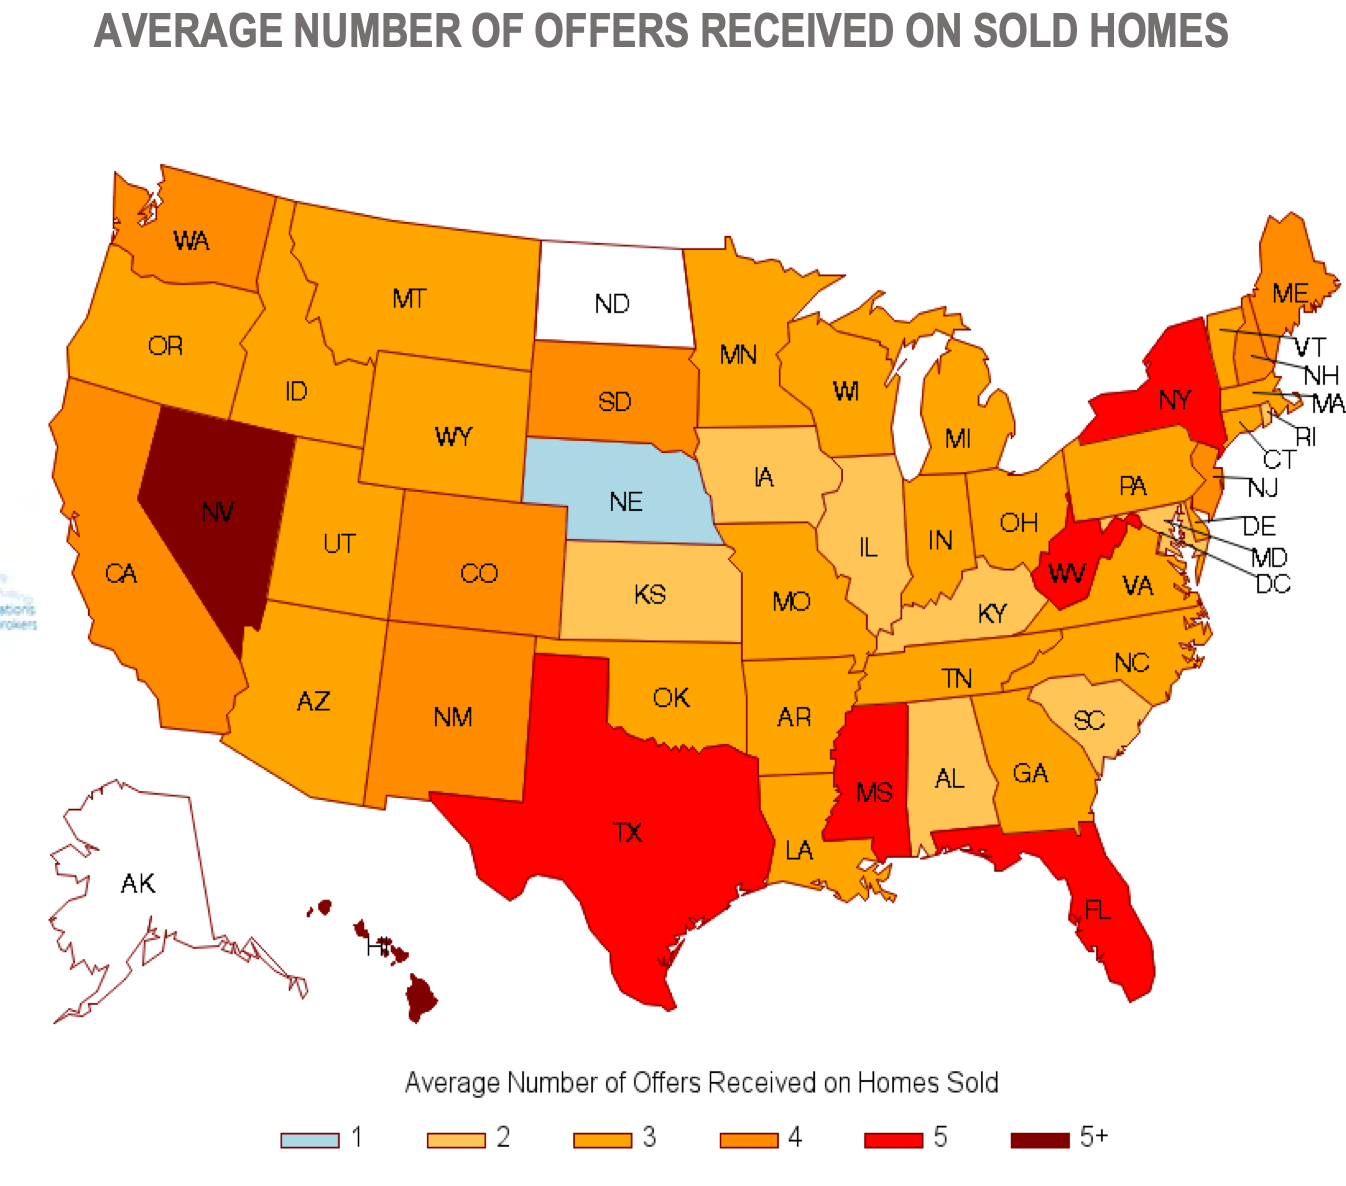 A map of the U.S. showing the average numbers of offers received on sold homes by state